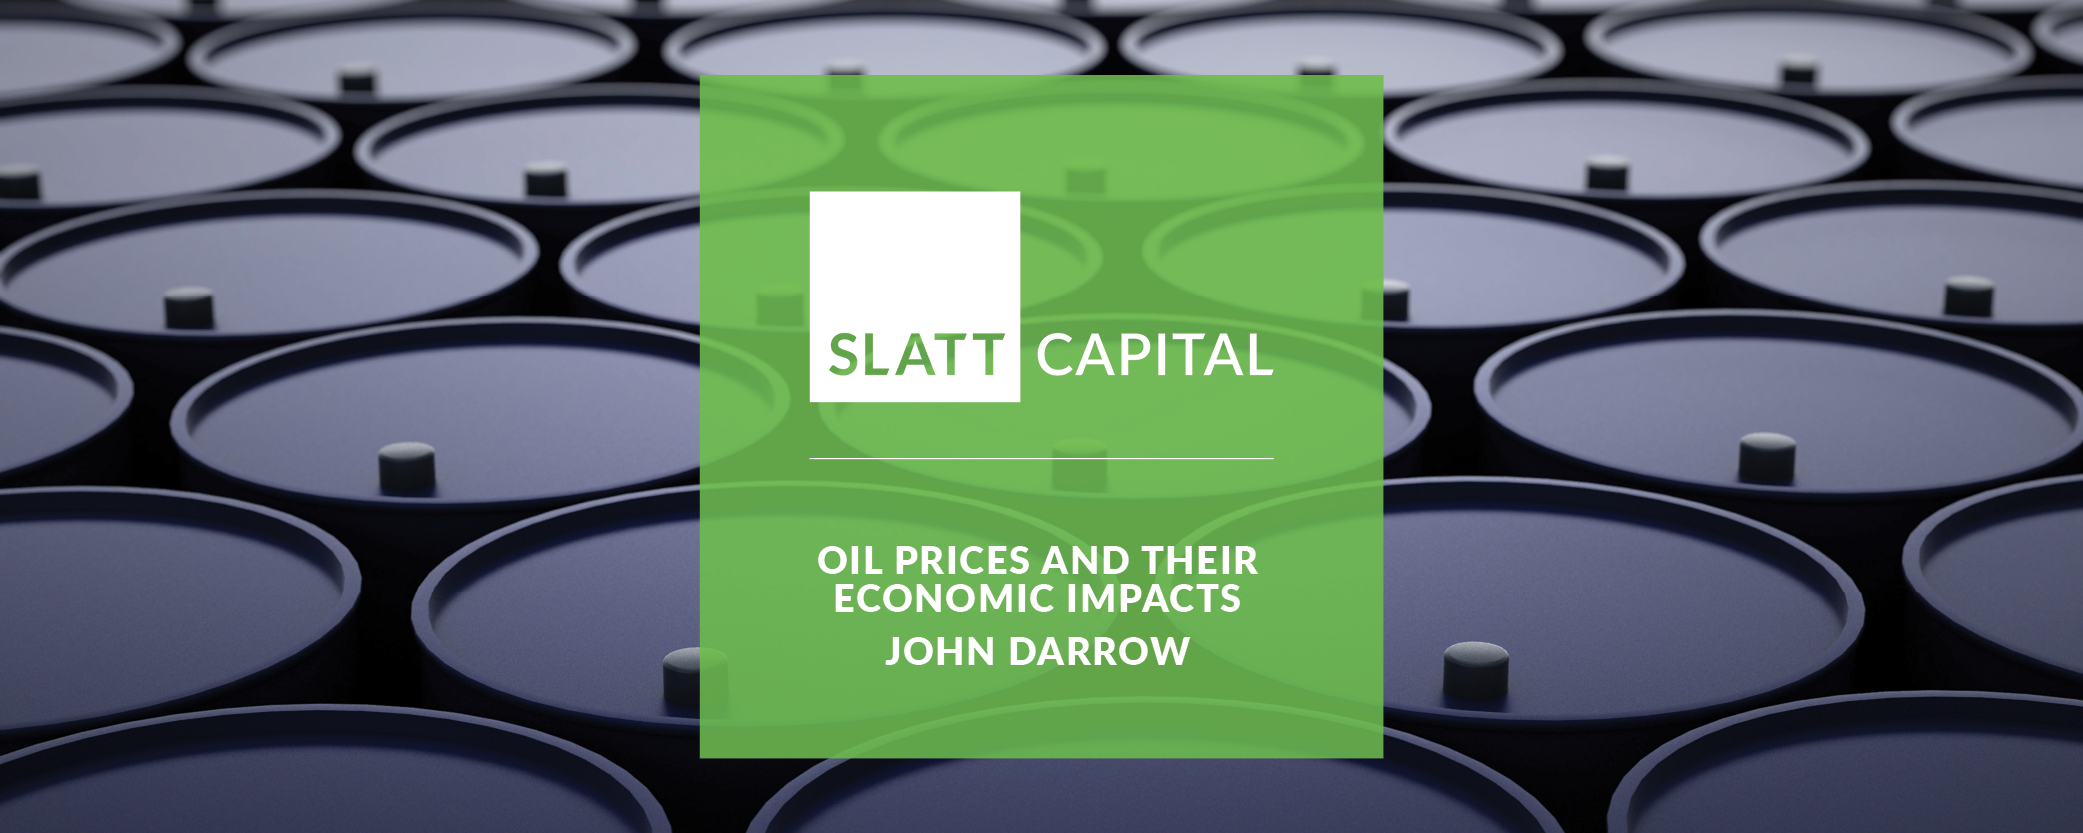 Oil prices and their economic impacts | a perspective by john darrow